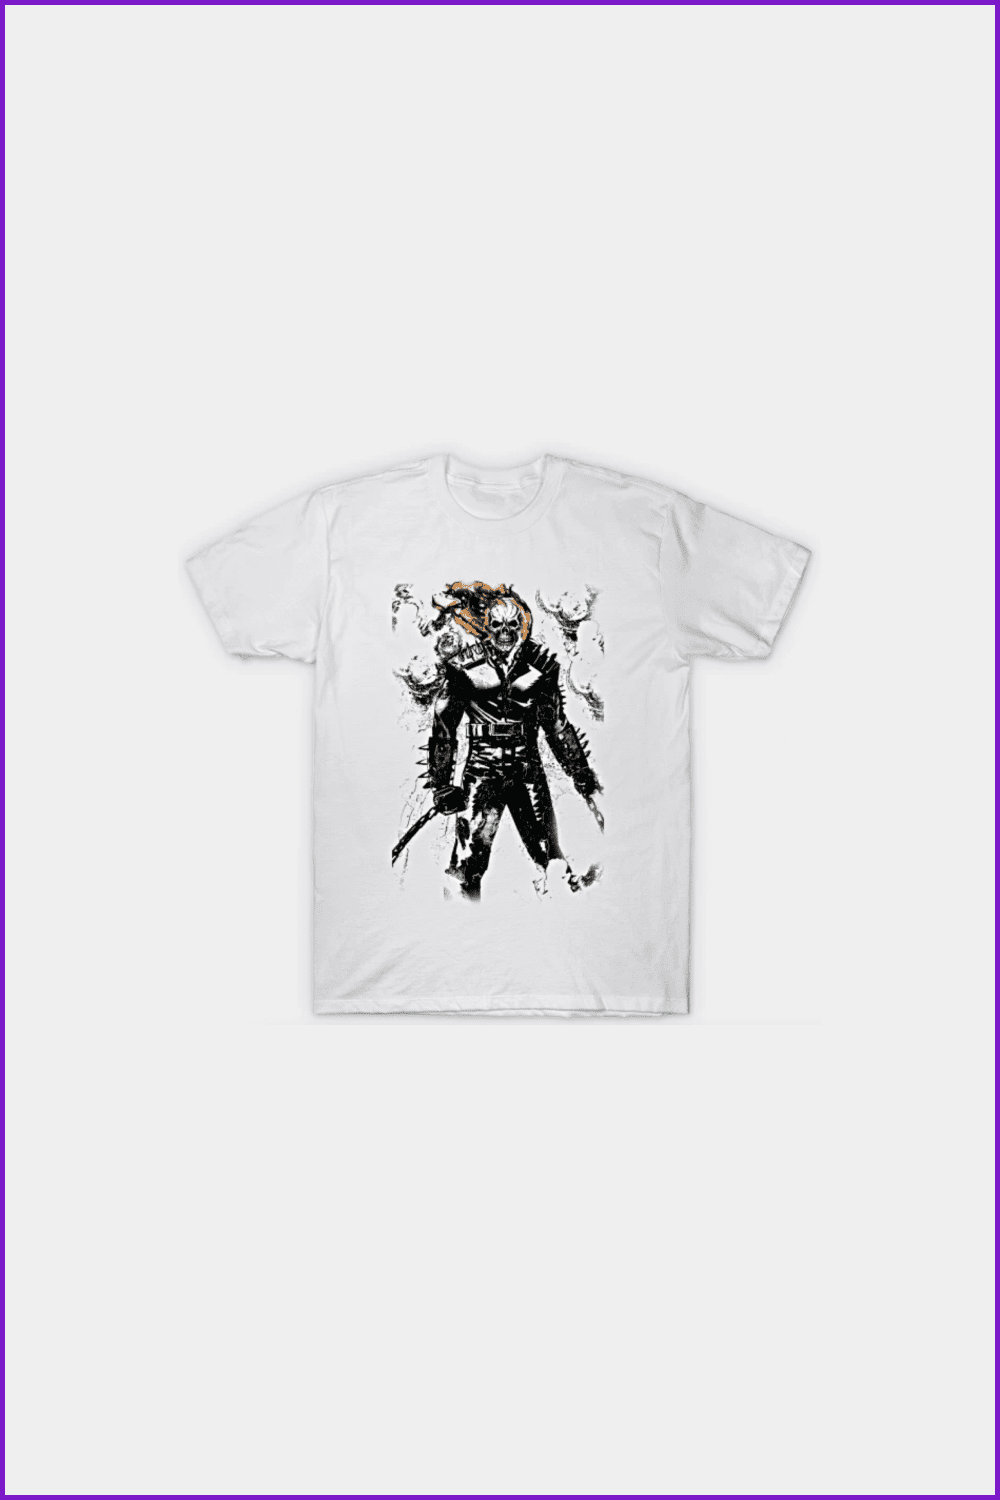 Ghost Rider Classic T-Shirt.